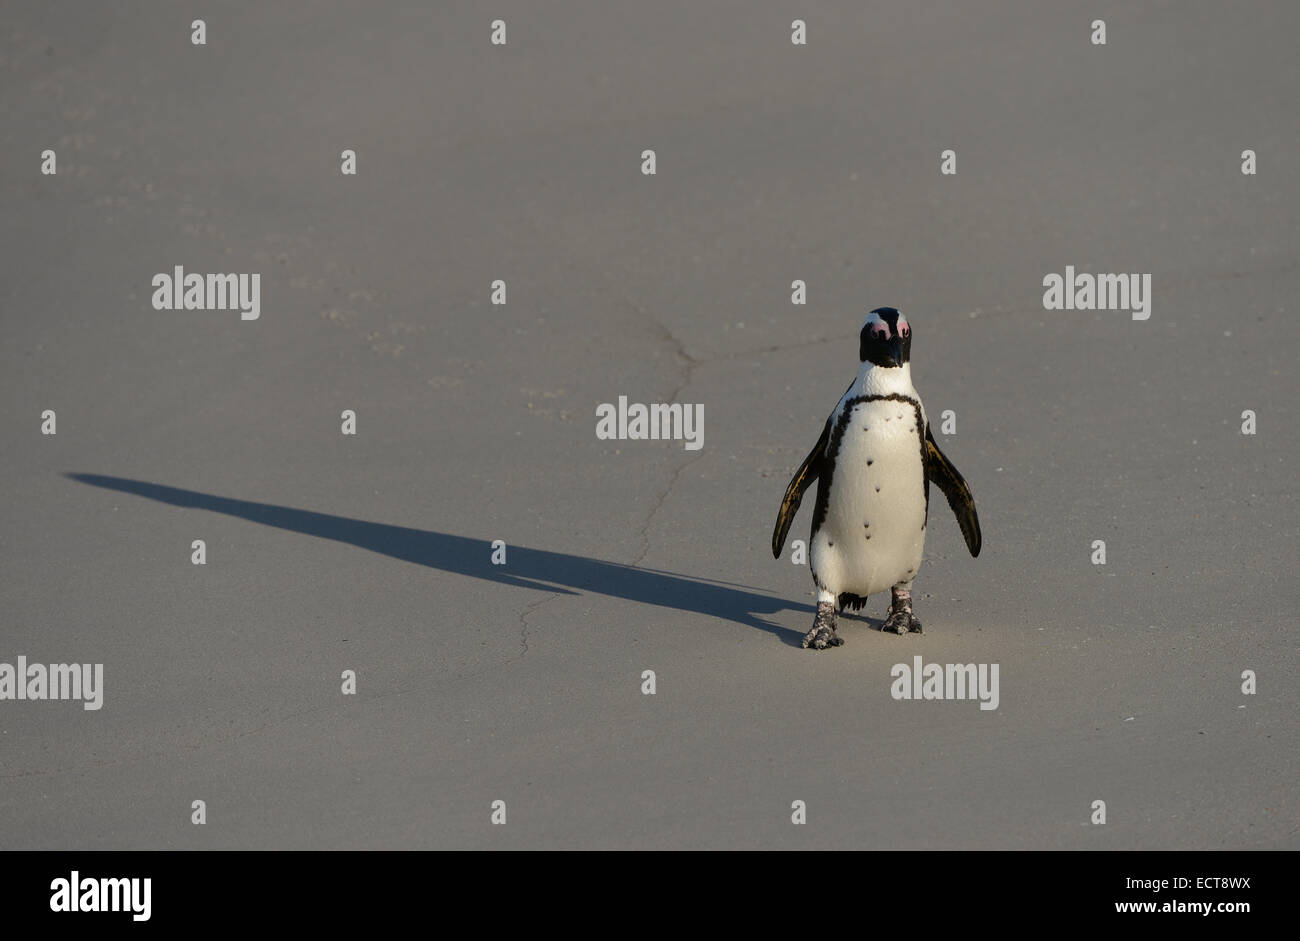 African Penguin (Spheniscus demersus) on the walk, following it's shadow, at a beach near Cape Town in South Africa. Stock Photo